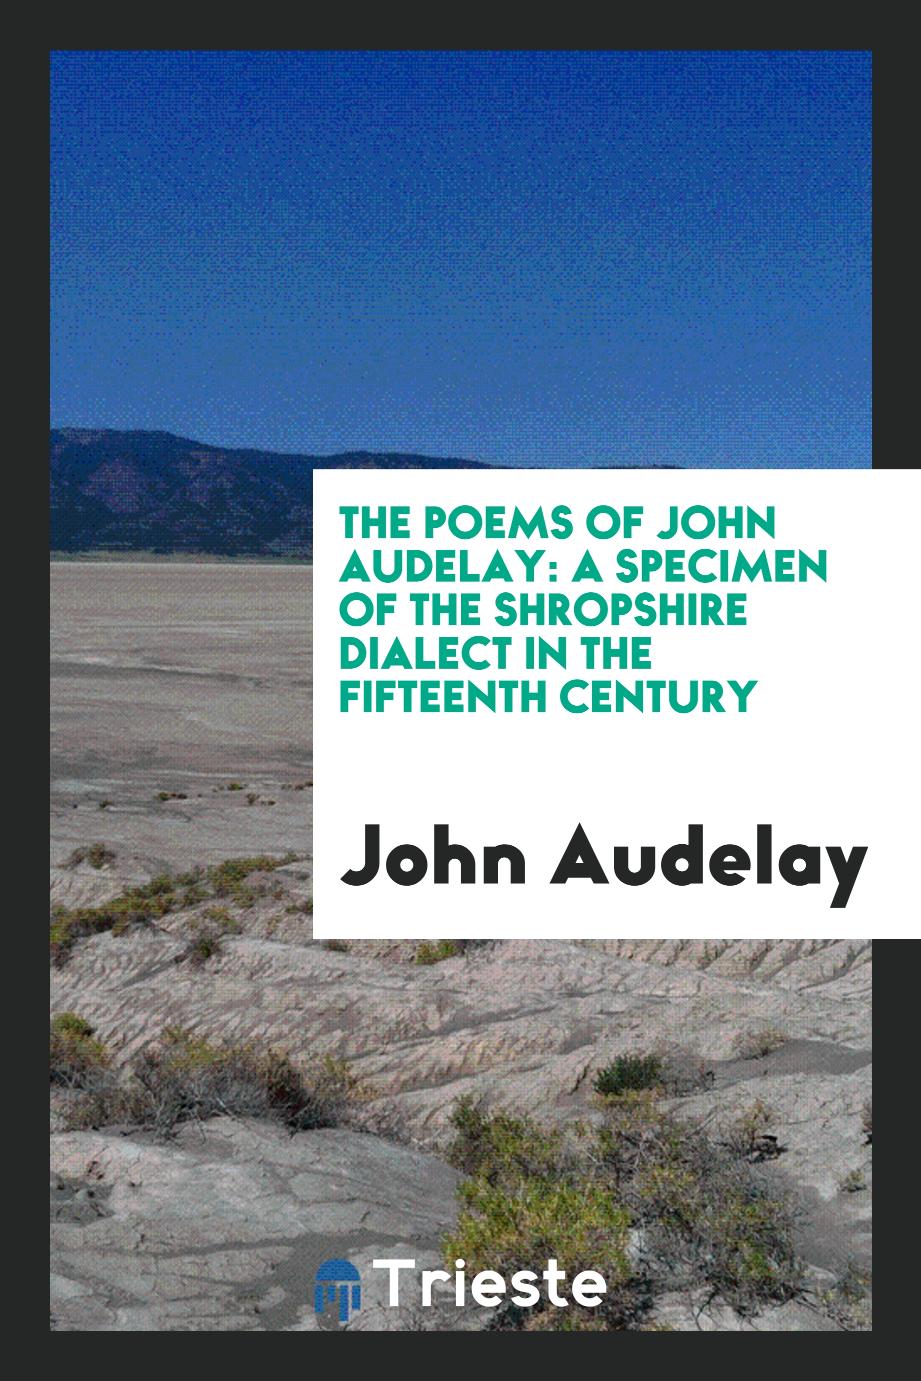 The Poems of John Audelay: A Specimen of the Shropshire Dialect in the Fifteenth Century